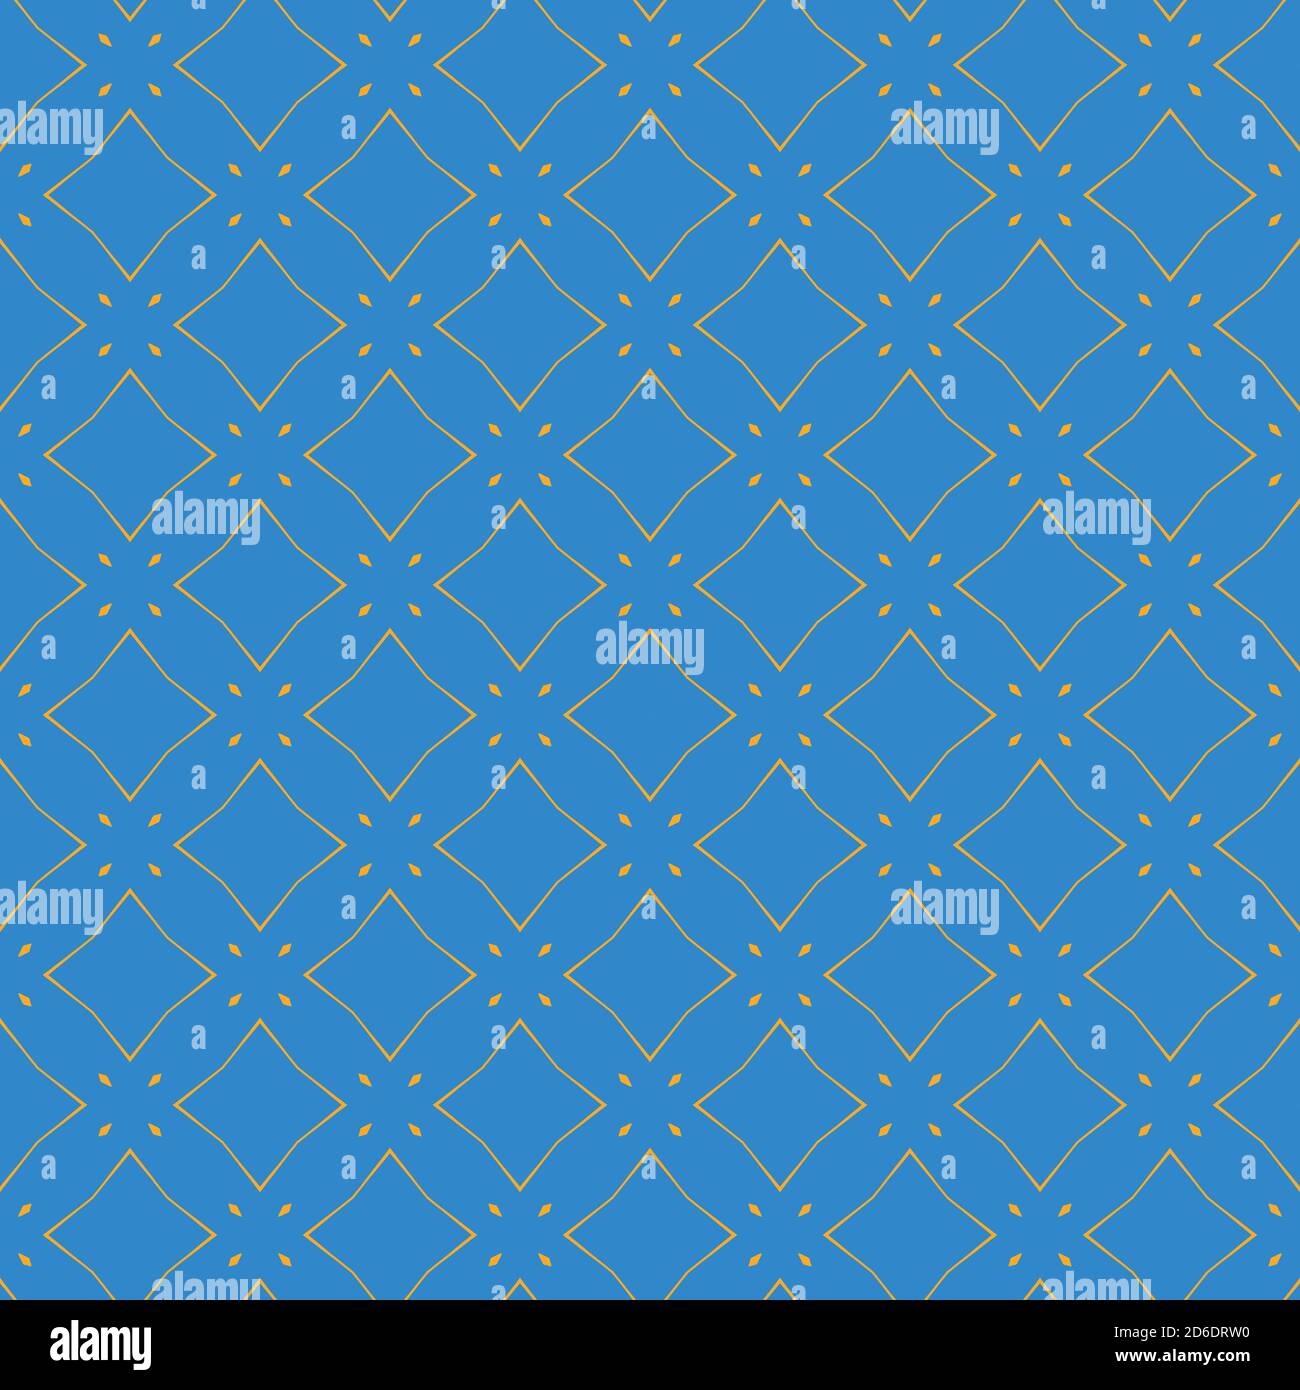 Vector seamless pattern texture background with geometric shapes, colored in blue and orange colors. Stock Vector